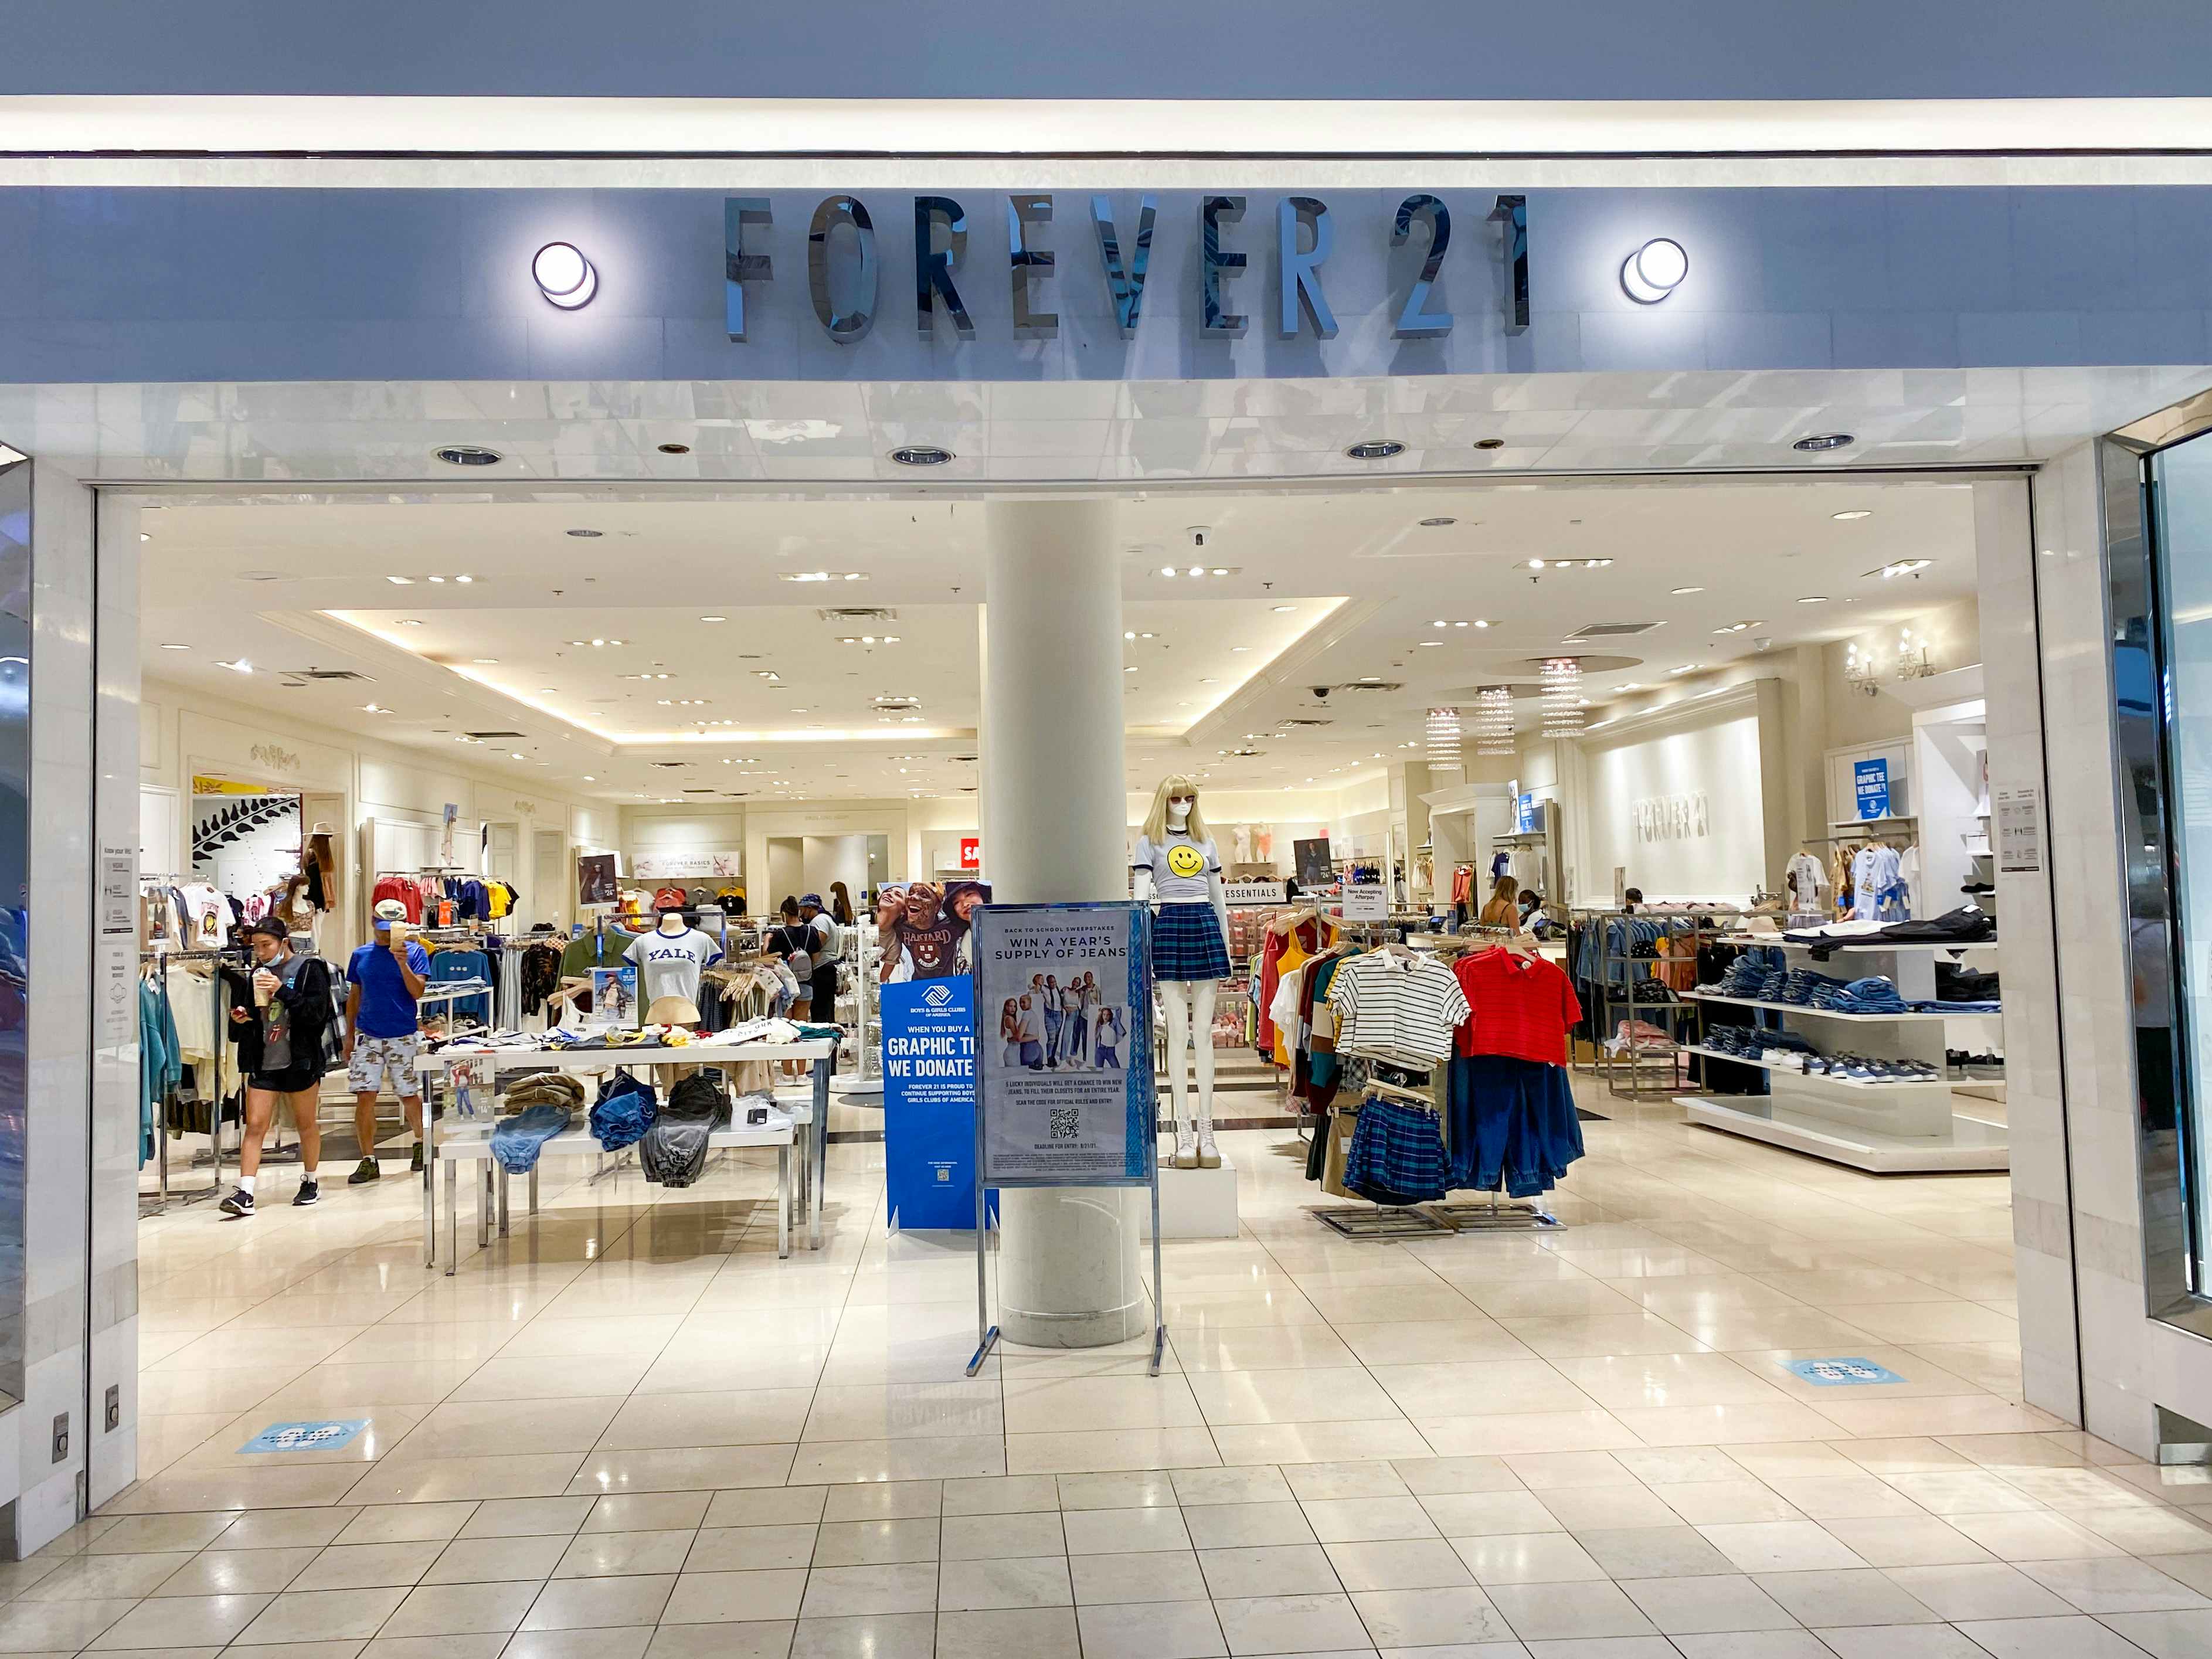 The mall entrance to a Forever 21 store